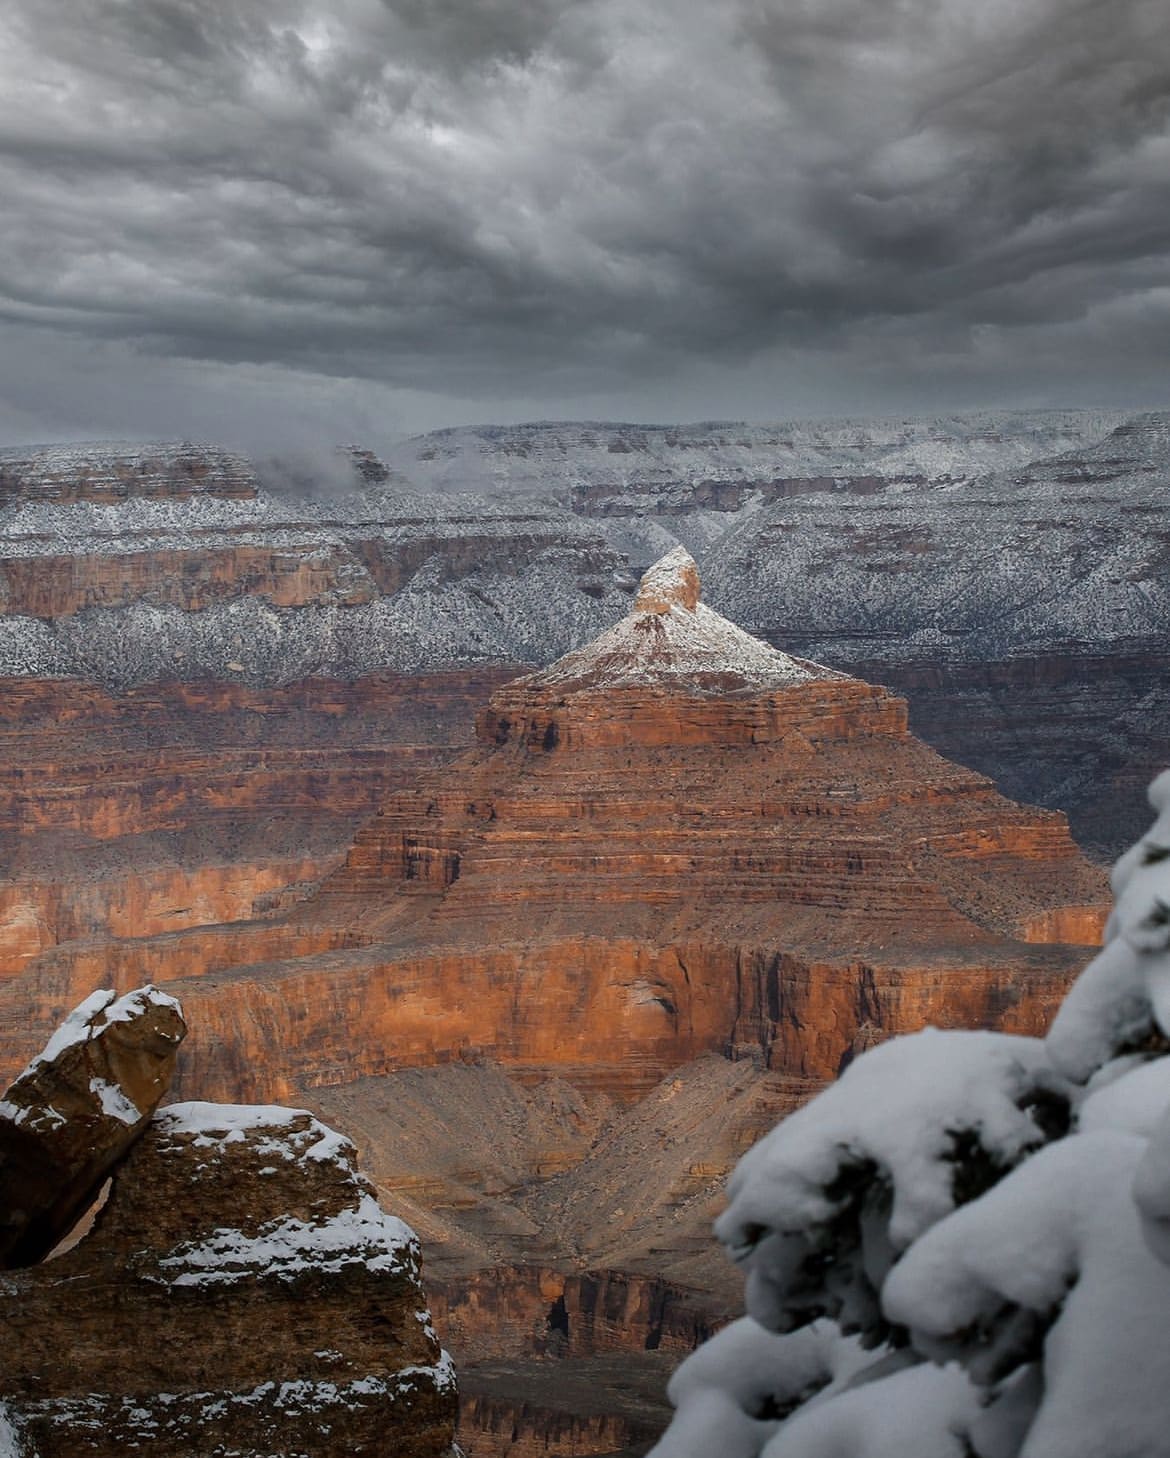 Moody skies over the Grand Canyon